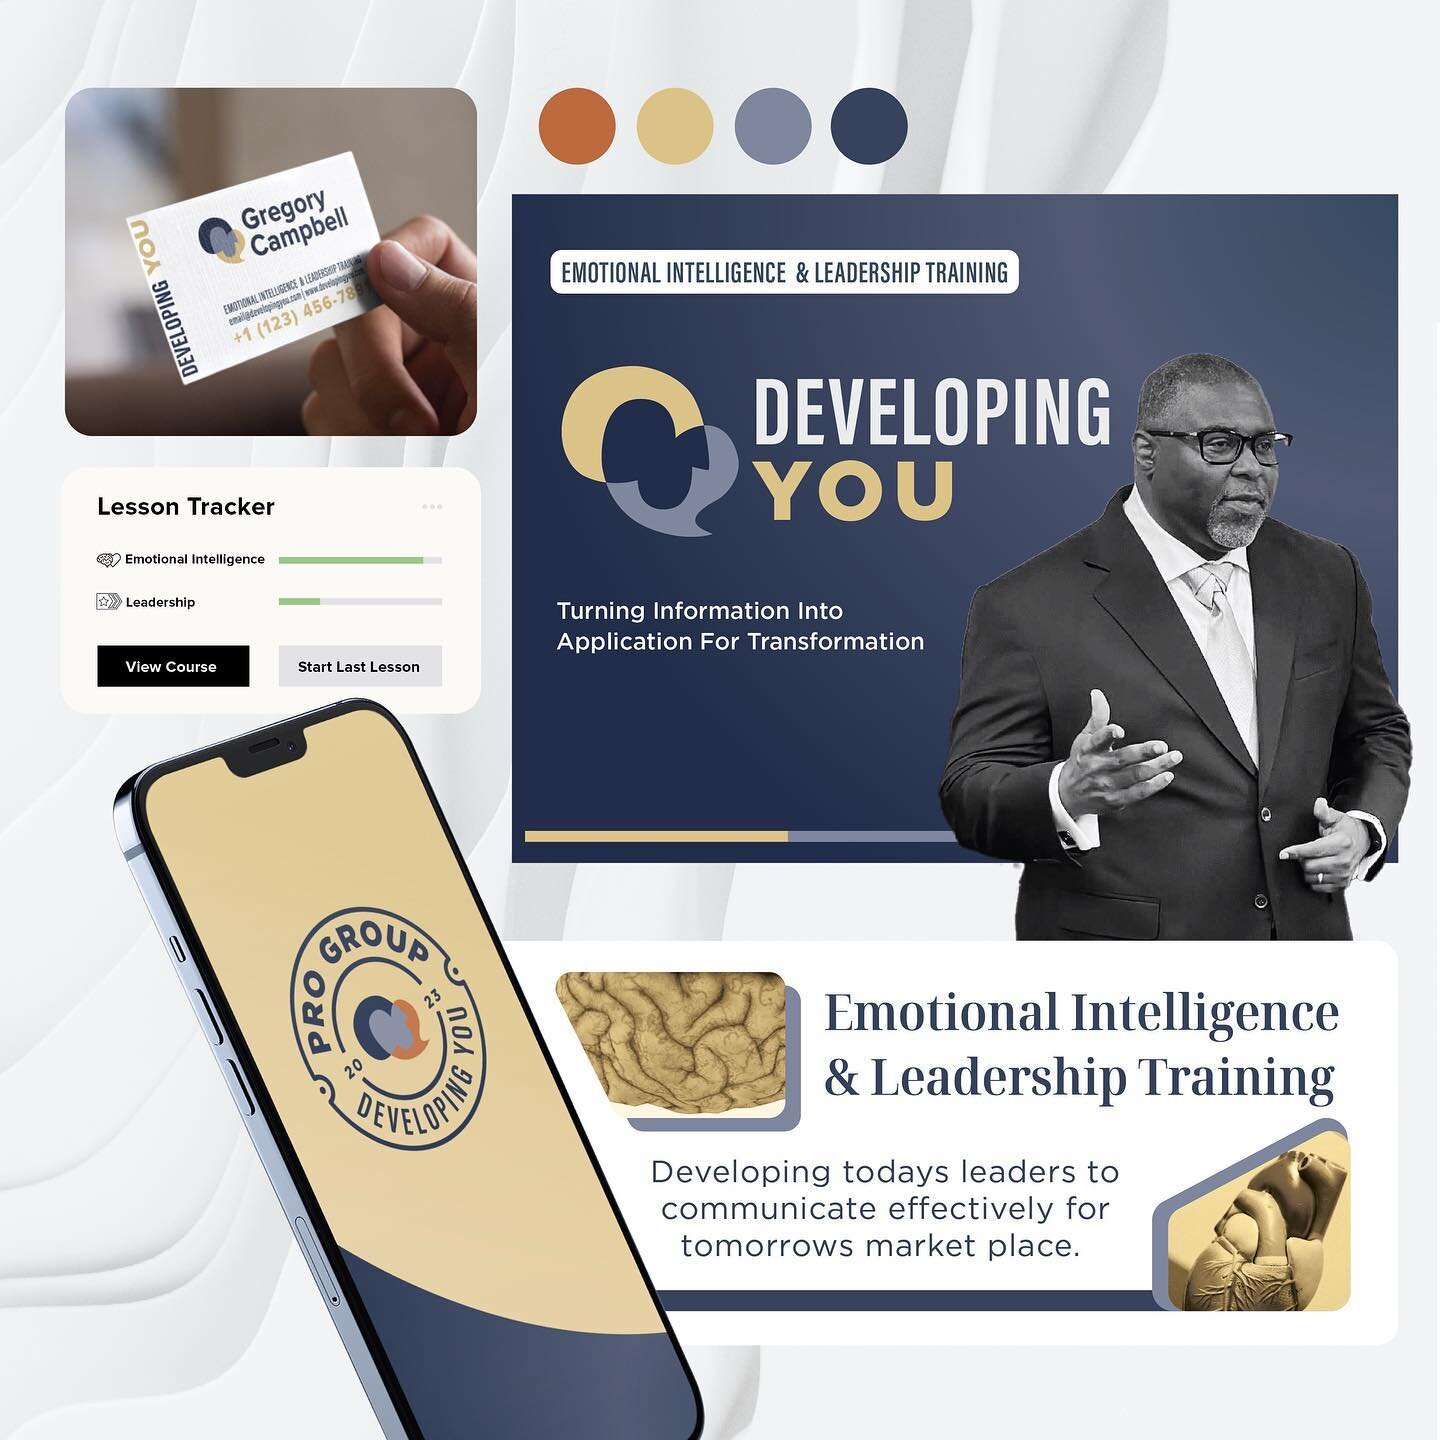 Introducing our latest branding masterpiece! 🌟

Meet &lsquo;Developing You,&rsquo; a meticulously crafted brand identity tailored for the inspirational Greg Campbell &ndash; a dynamic speaker and author rooted in faith. 🎤📚 Specializing in emotiona